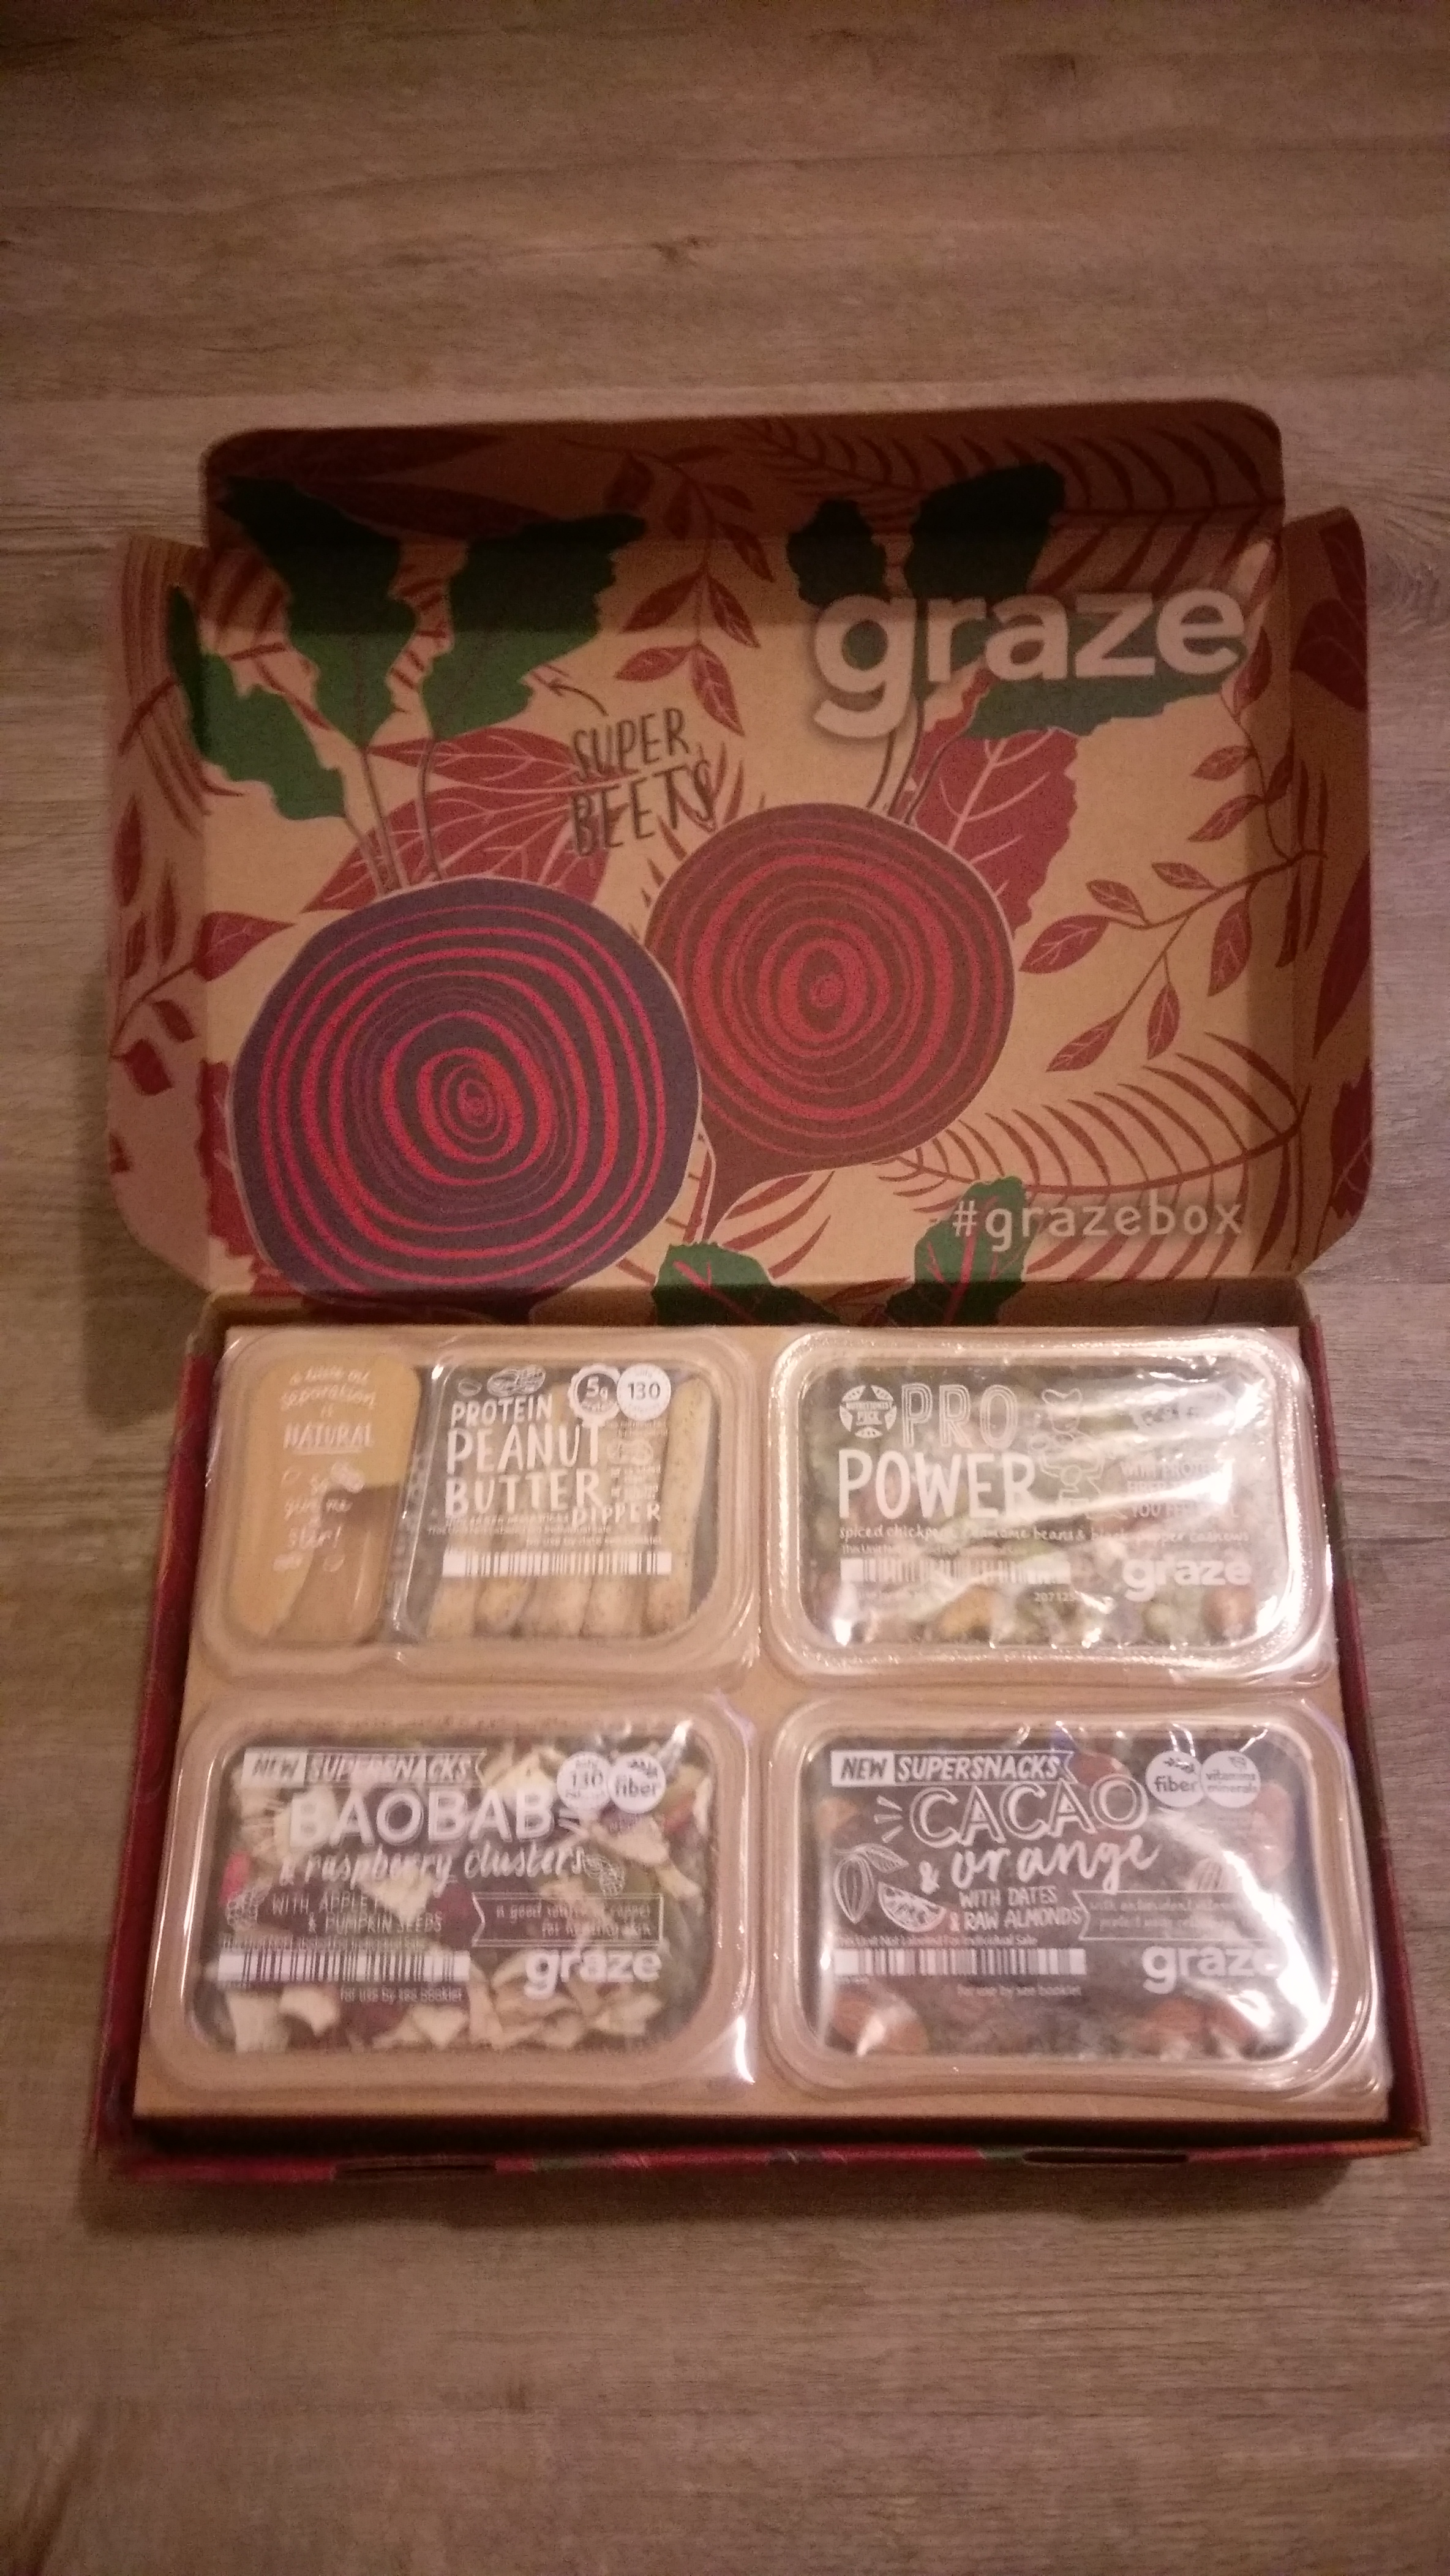 Grave Travel Snack Box - travel tech, products and apps I can’t live without